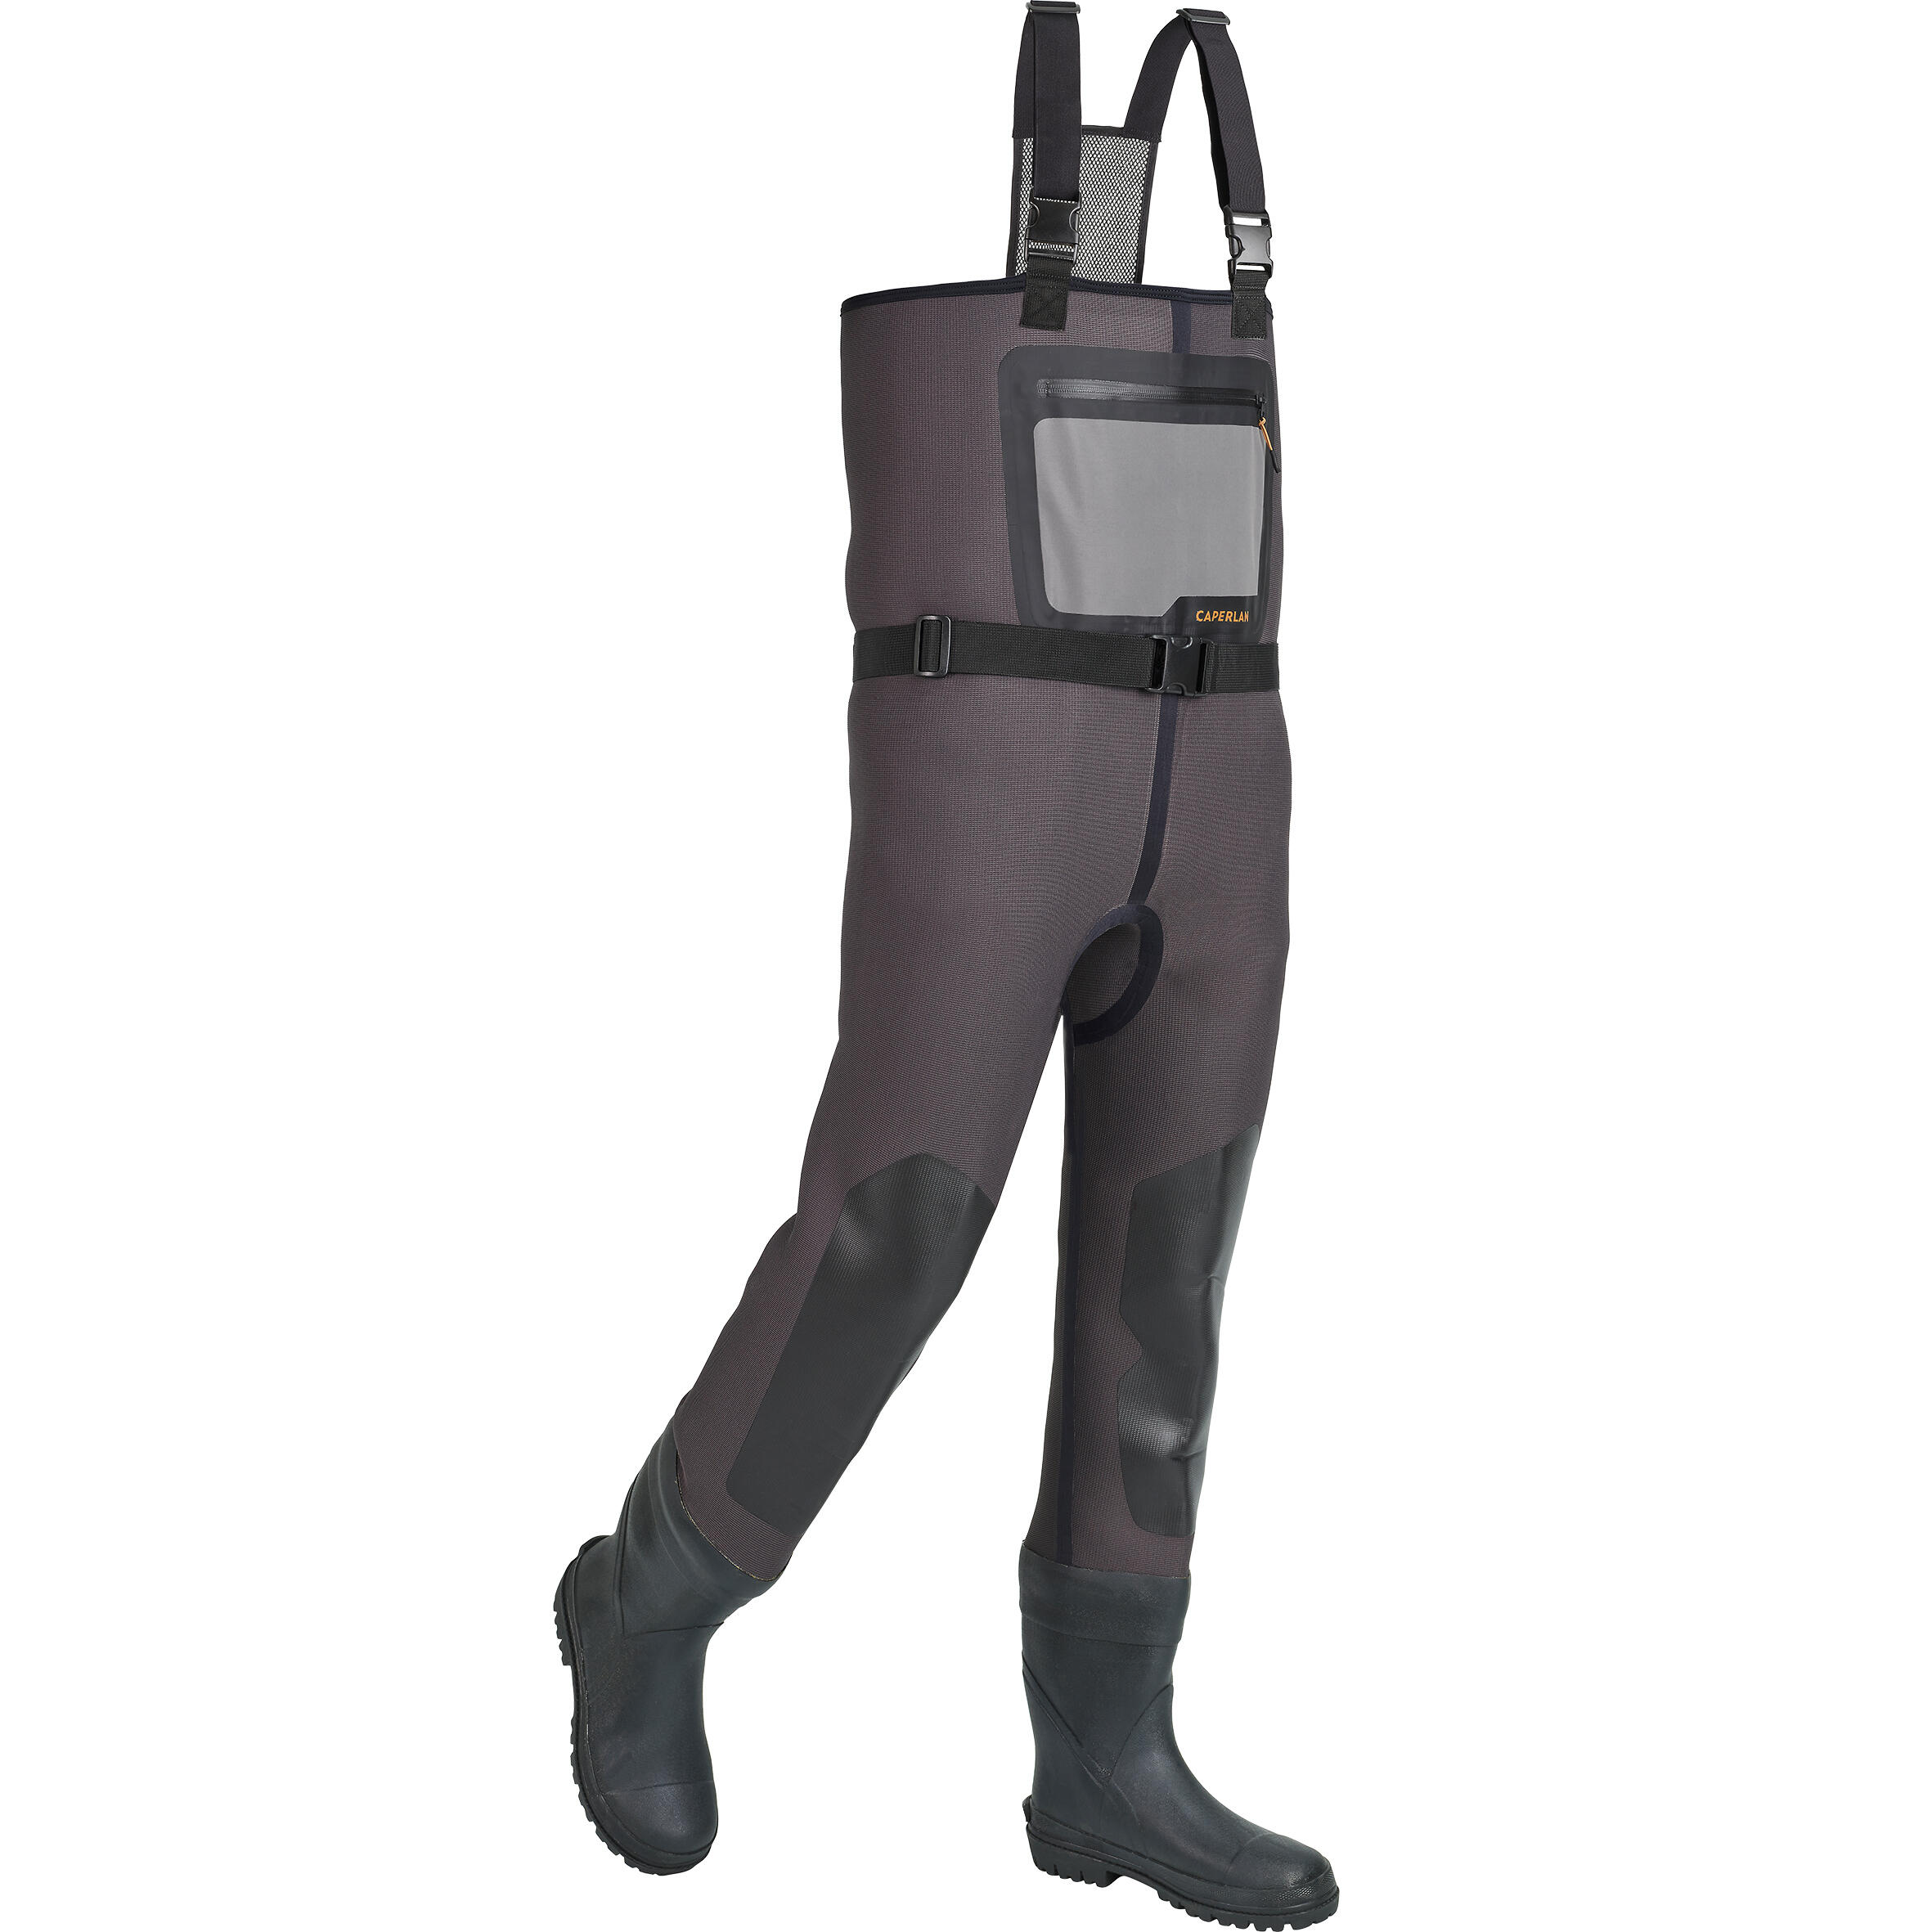 Waders Thermo Pescuit 500 CAPERLAN imagine noua